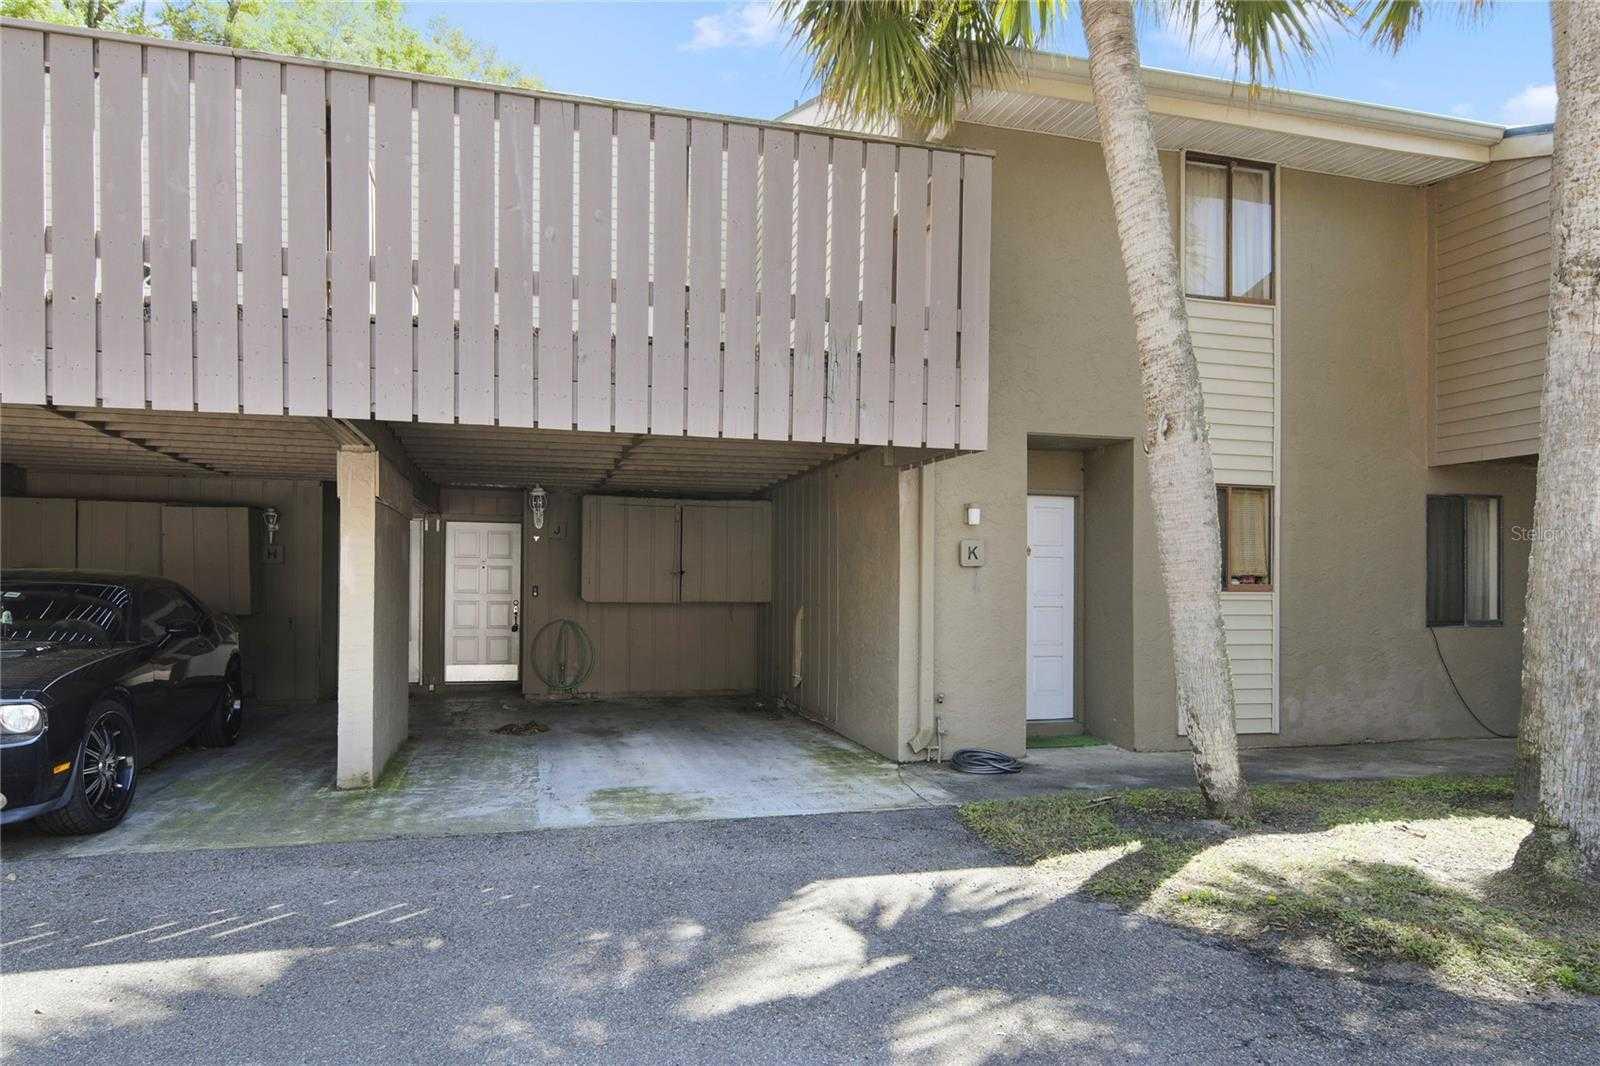 1409 OAK PLACE APT J, APOPKA, Townhouse,  for sale, Natalie Amento, PA, Florida Realty Investments